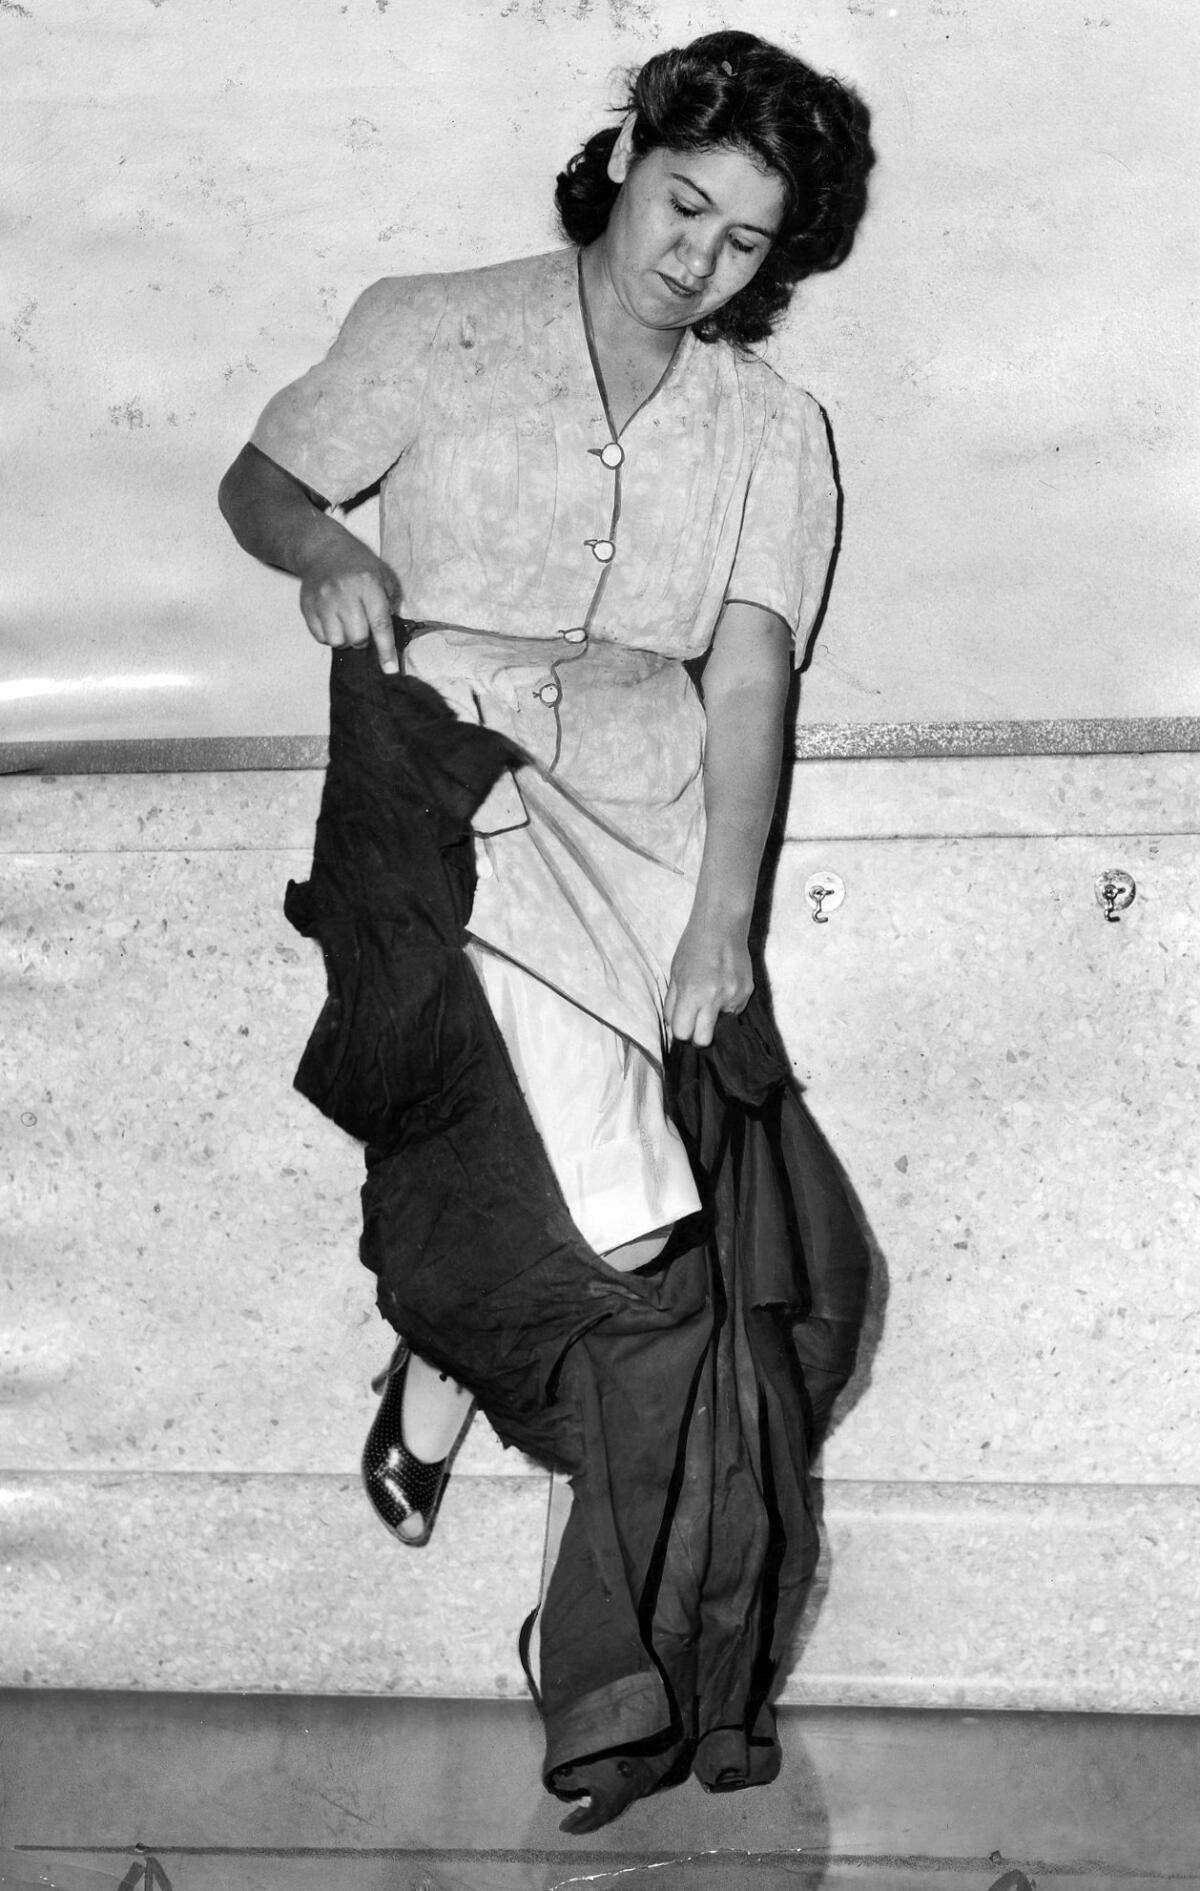 A vintage black and white news photograph shows a Latina woman tearing a zoot suit apart.